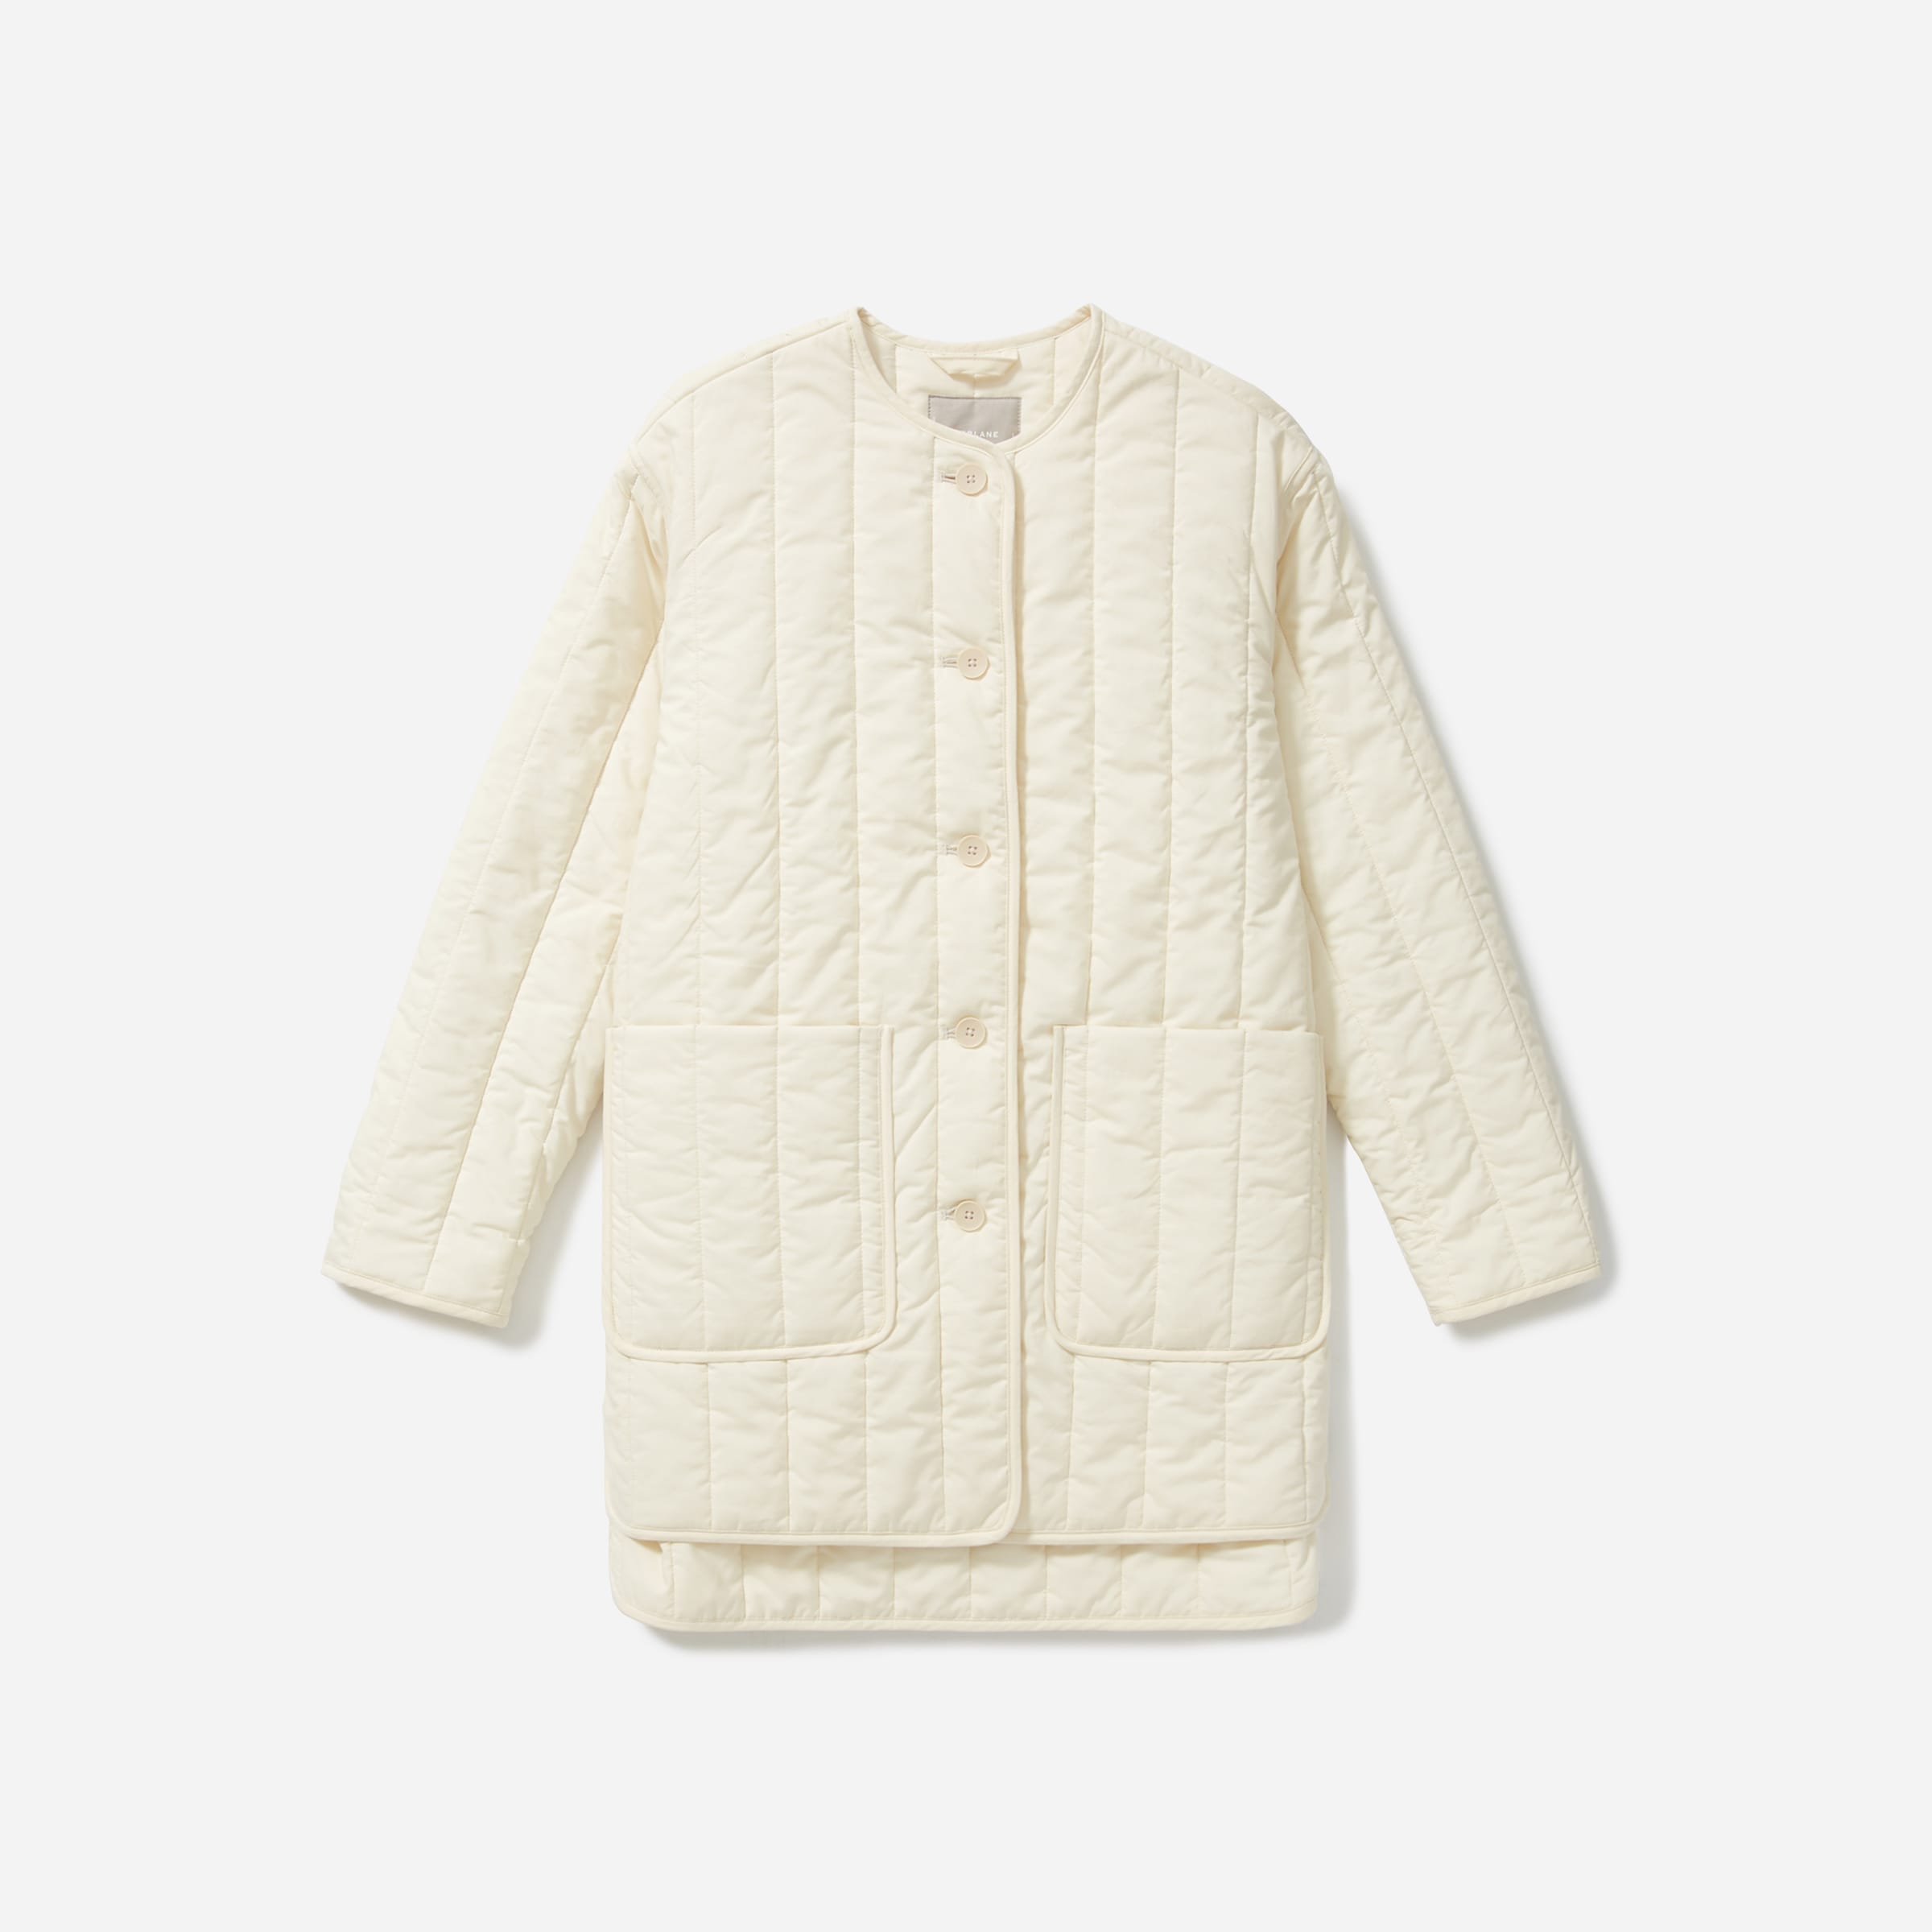 MEDIUM WELL White Quilted Cotton Quilted Leather Jacket